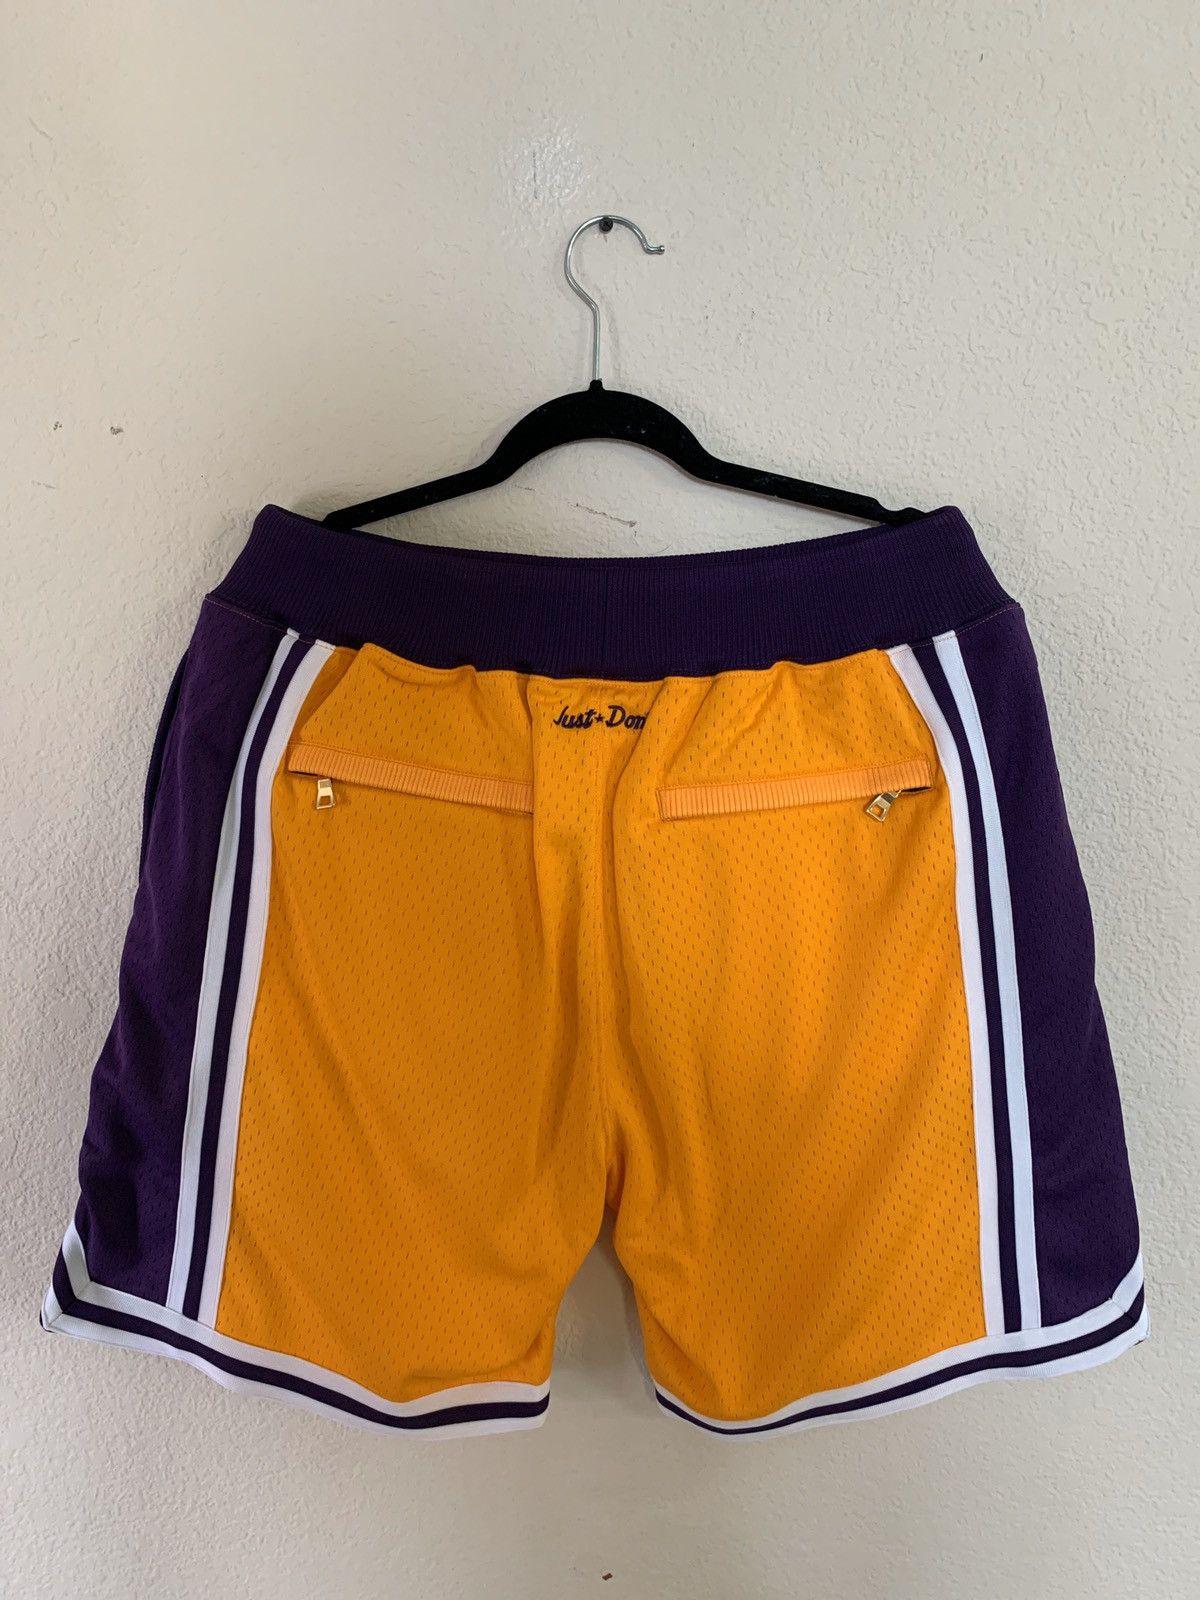 Mitchell & Ness JUST DON LOS ANGELES LAKERS 1996-97 HOME SHORTS Size US 34 / EU 50 - 8 Thumbnail